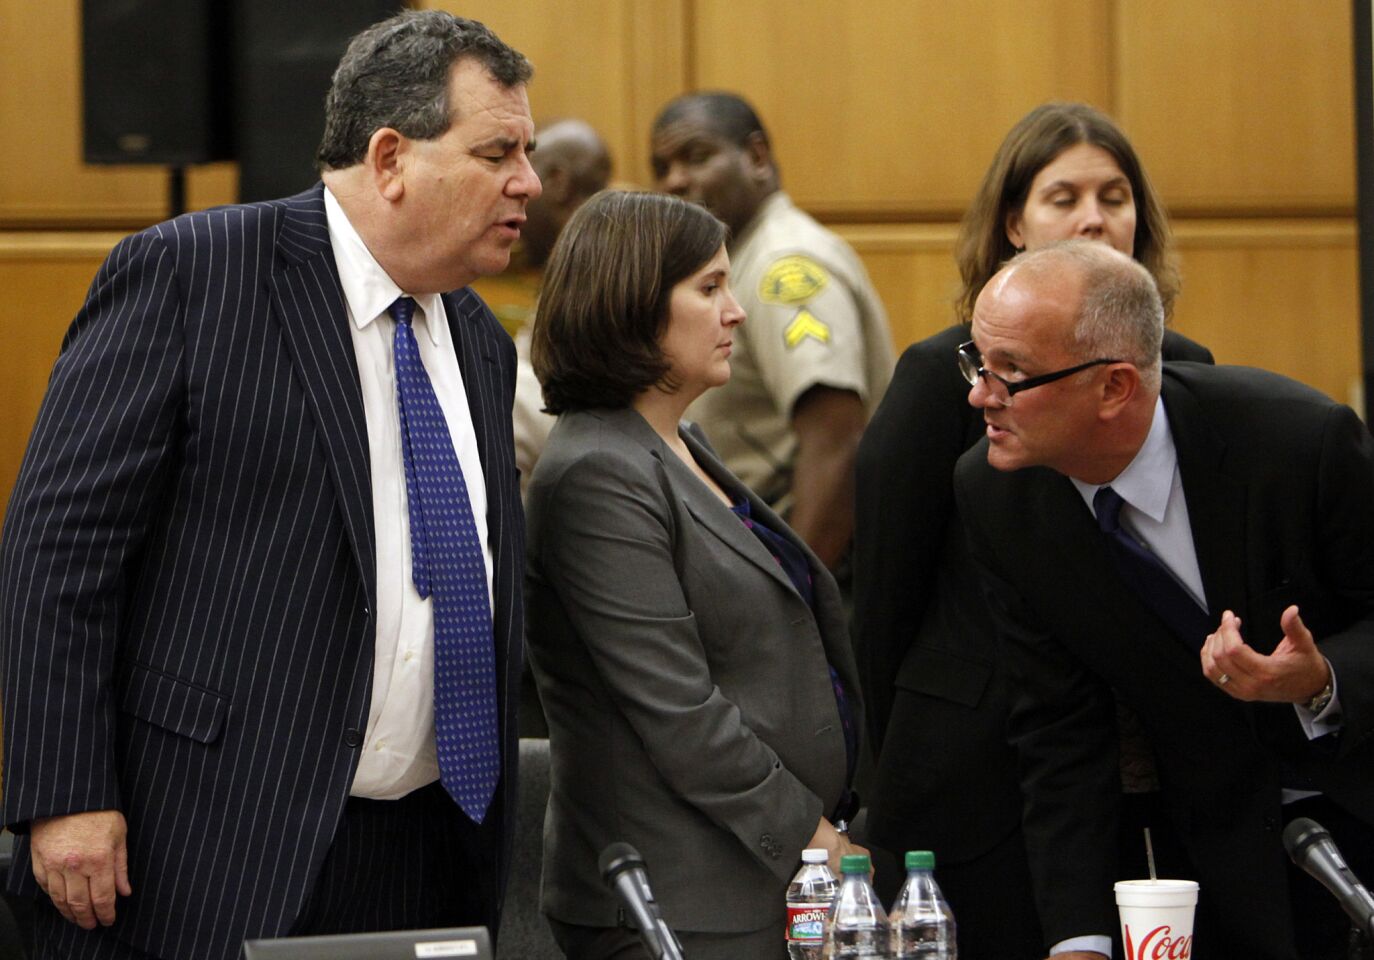 Brian Panish, left, attorney for the Michael Jackson family, speaks with Kathryn Cahan and Marvin Putnam, attorneys with AEG Live LLC ,in Los Angeles County Superior Court in the Michael Jackson wrongful-death trial Thursday in downtown Los Angeles.